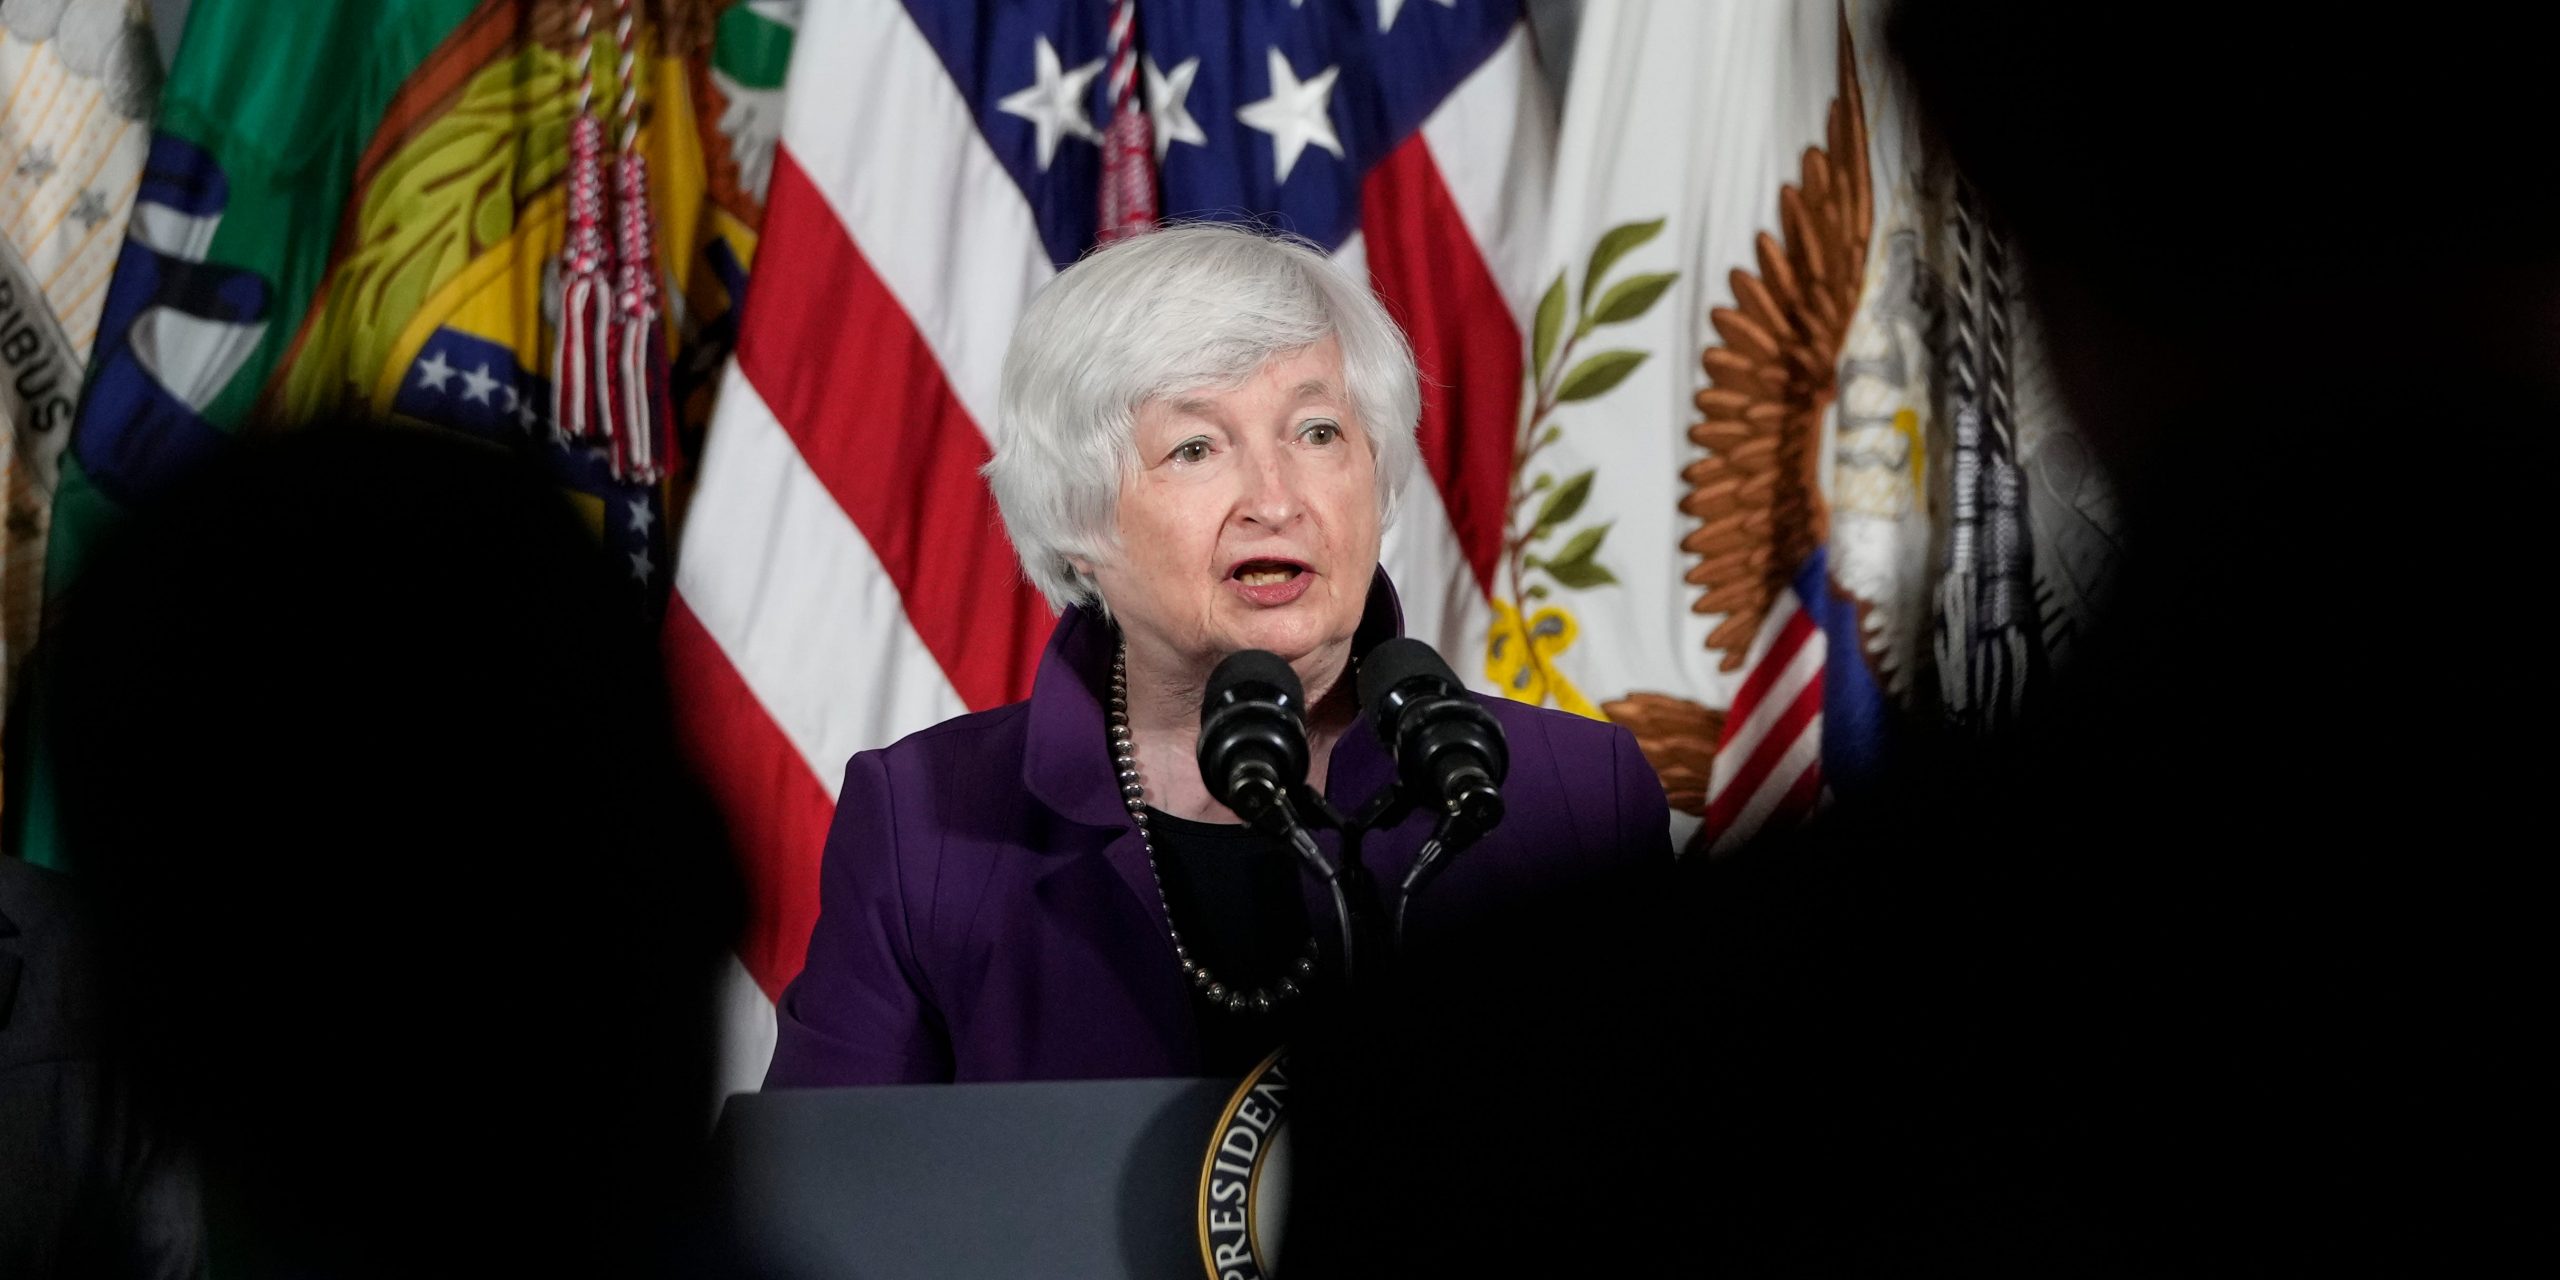 Treasury Secretary Janet Yellen speaks during an event at the US Department of the Treasury on September 15, 2021 in Washington, DC.